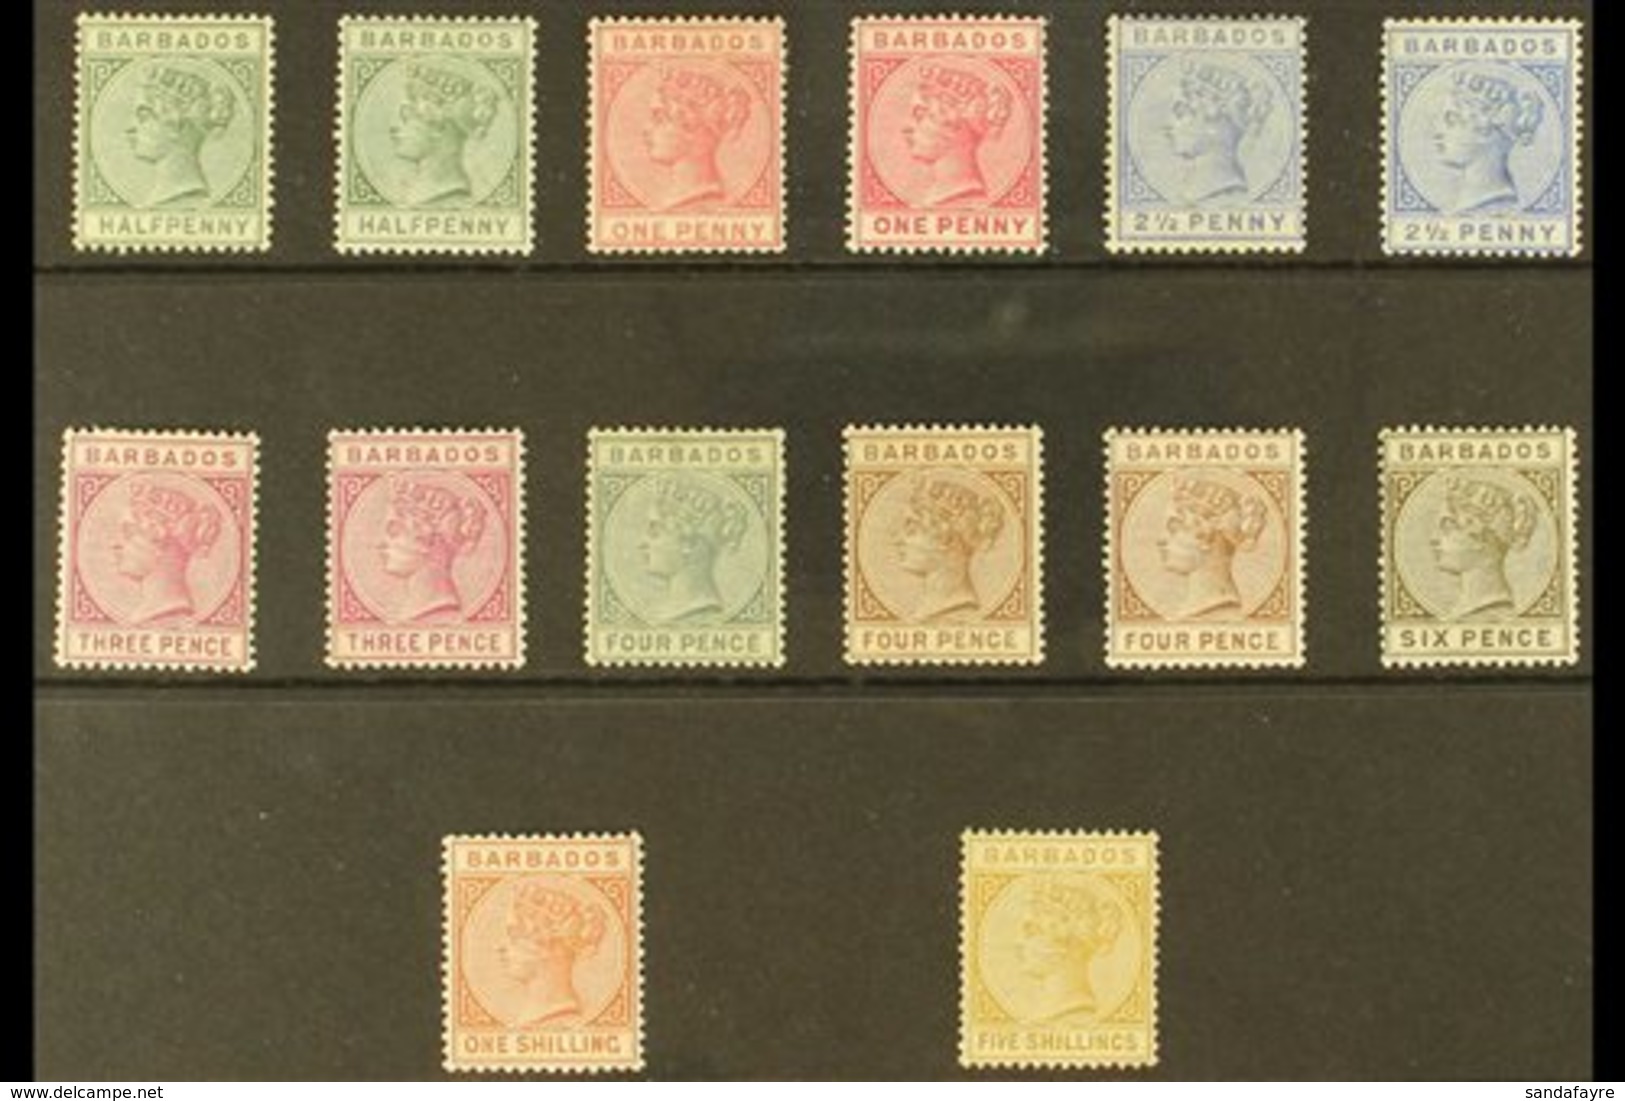 1882-86 QV Definitives Complete Set Including All The SG Listed Shades, SG 89/103, Very Fine Mint. Fresh And Attractive! - Barbades (...-1966)